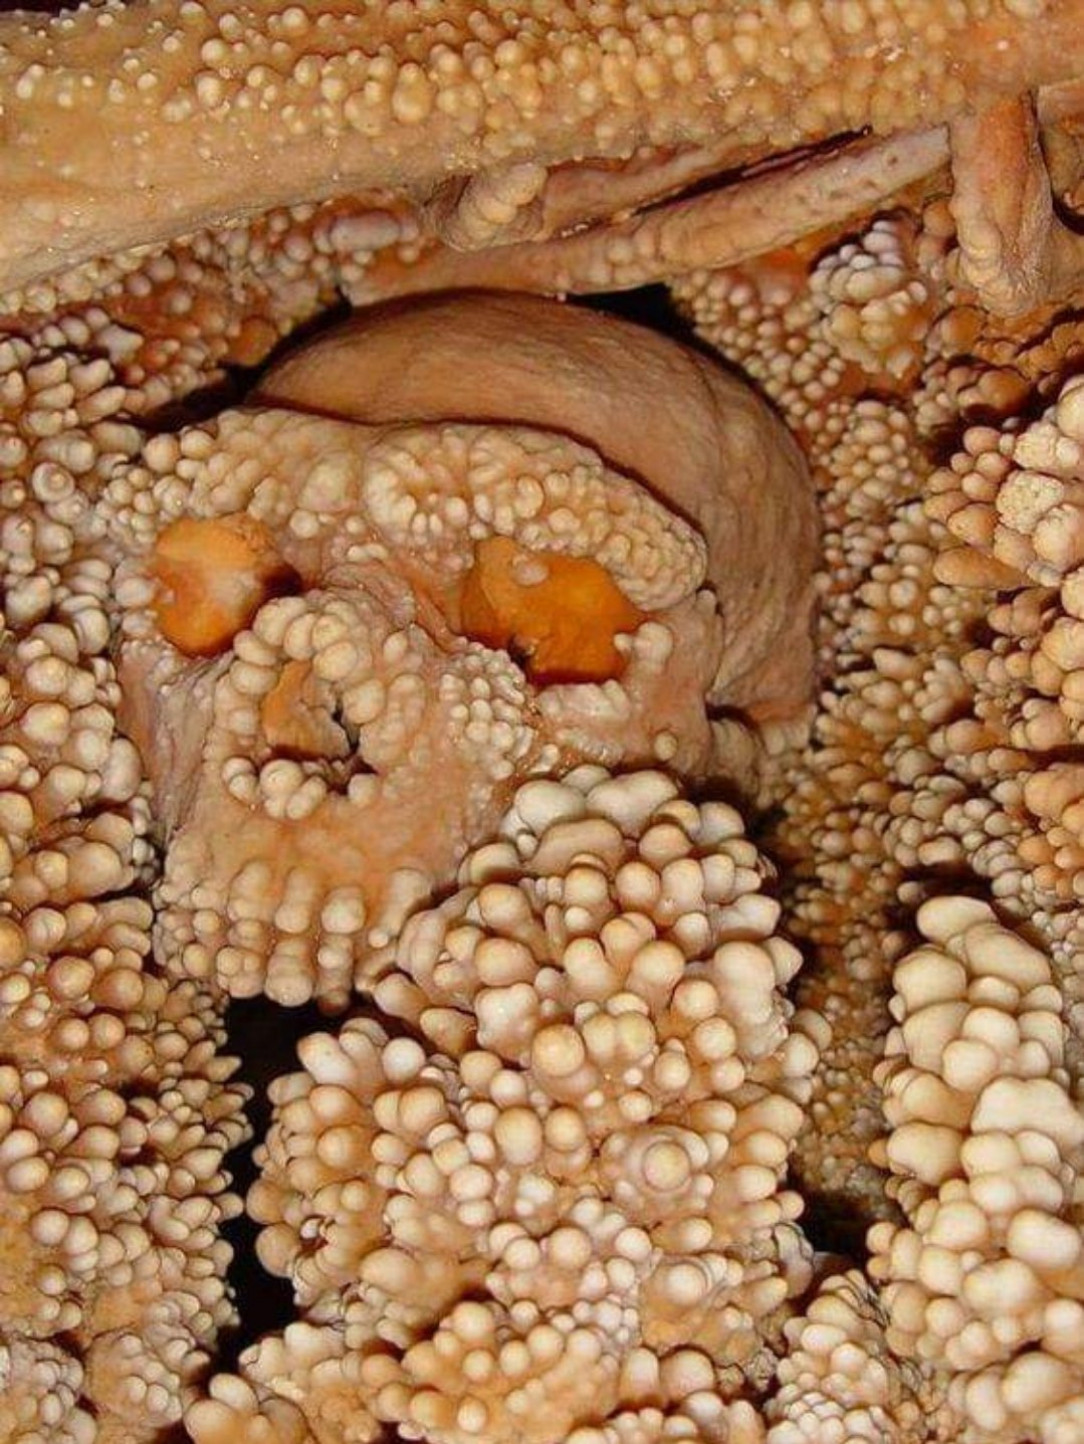 Human skull being absorbed by limestone